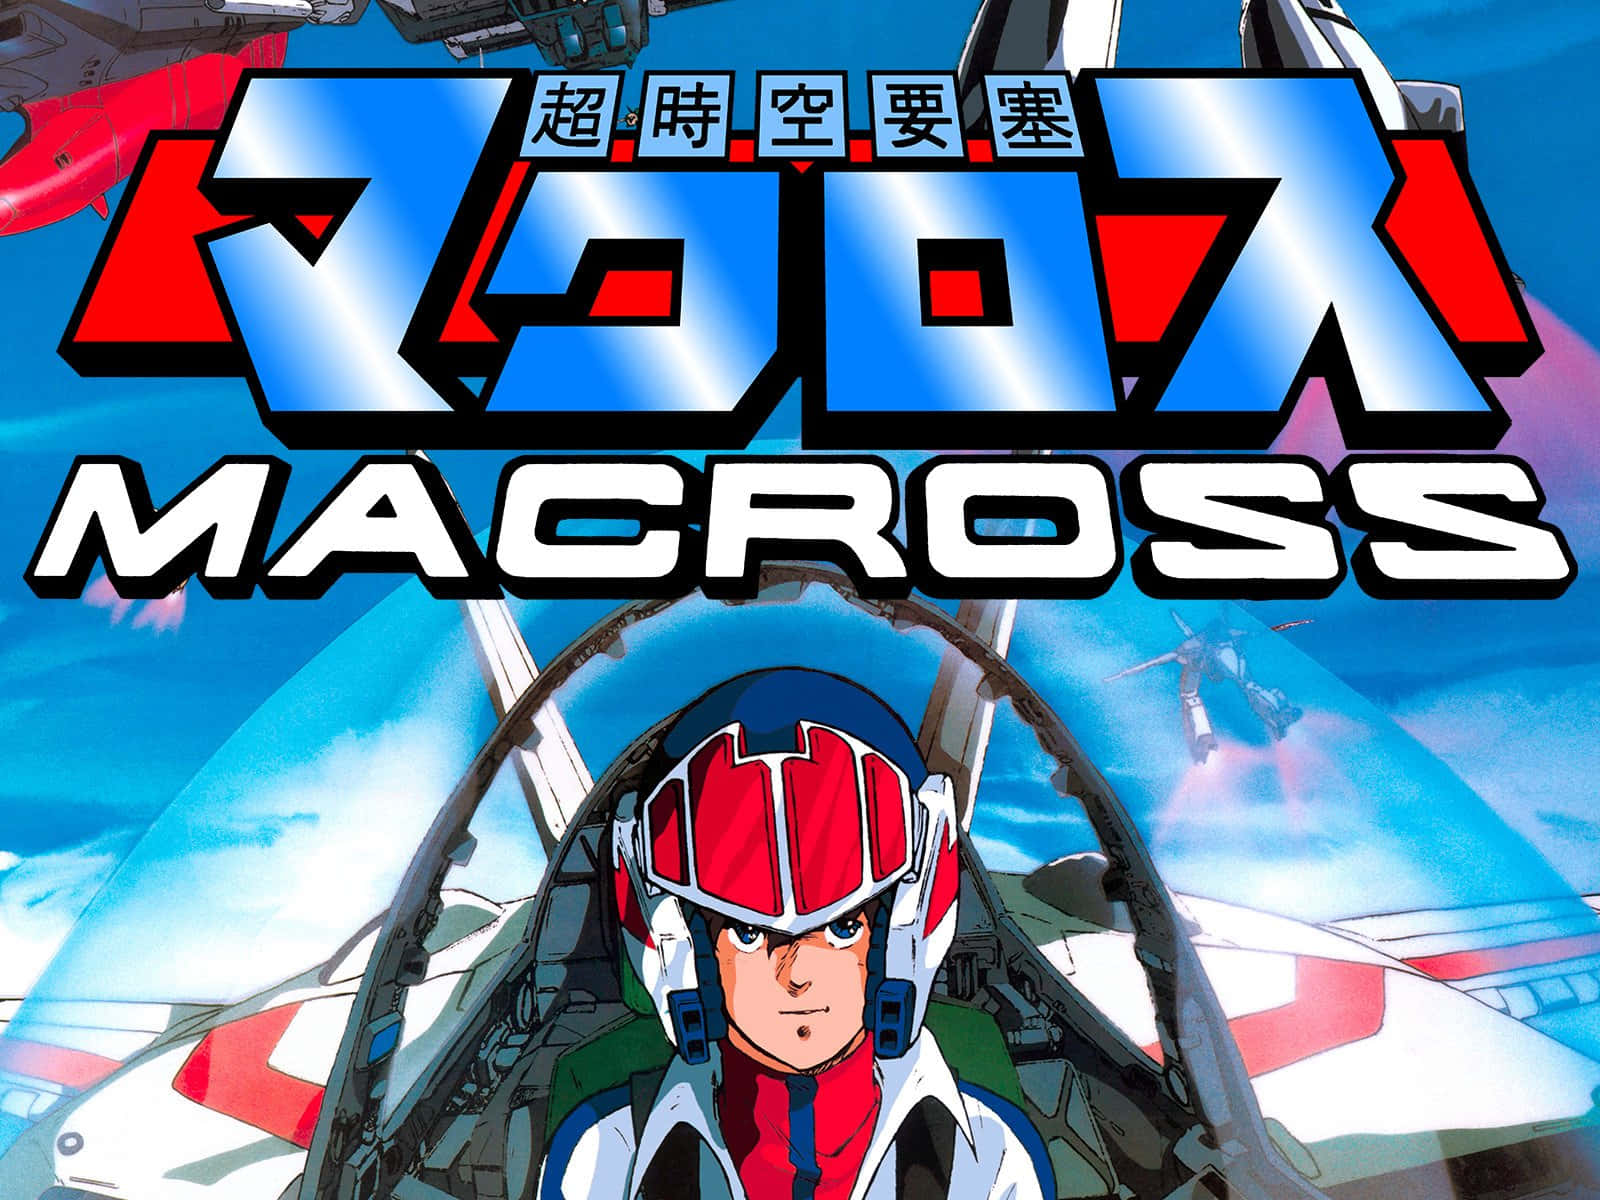 "The Unstoppable Force of Macross"